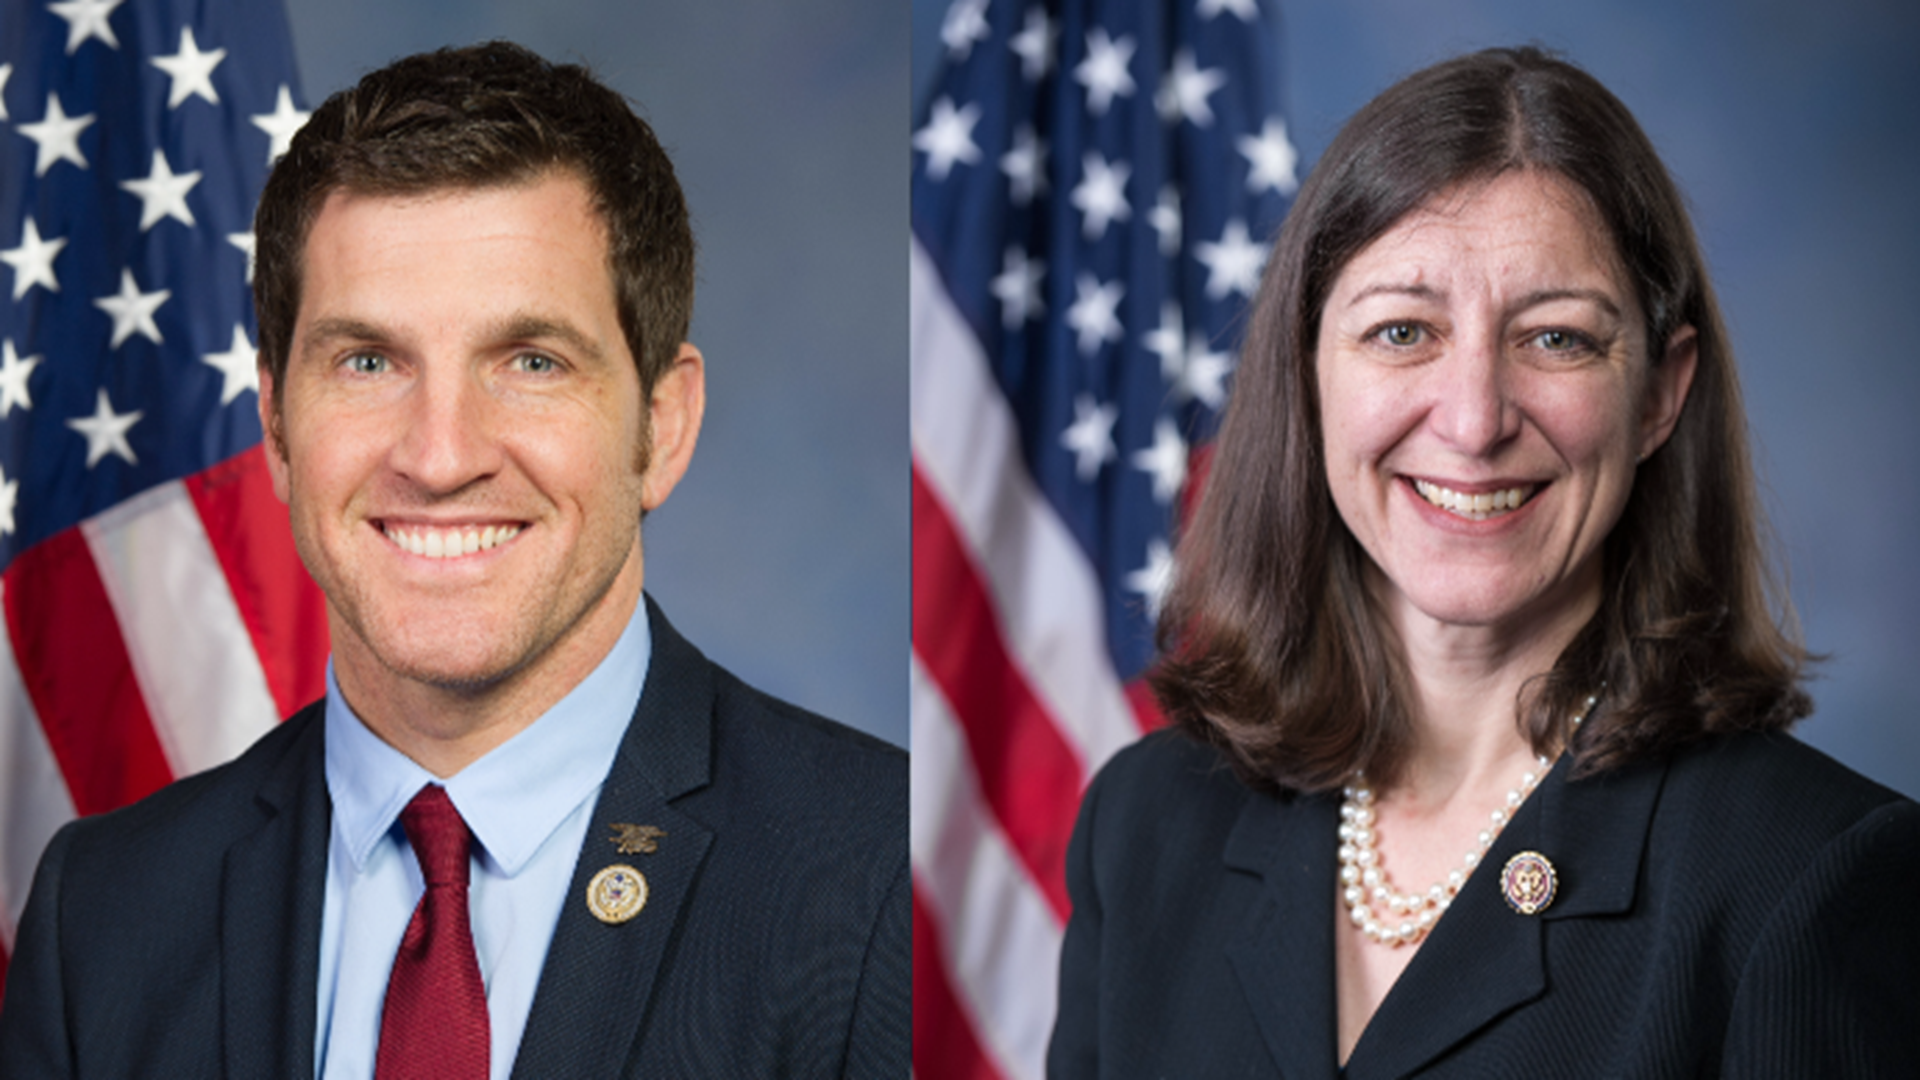 Scott Taylor and Rep. Elaine Luria spar over the incumbent's record on constituent service.